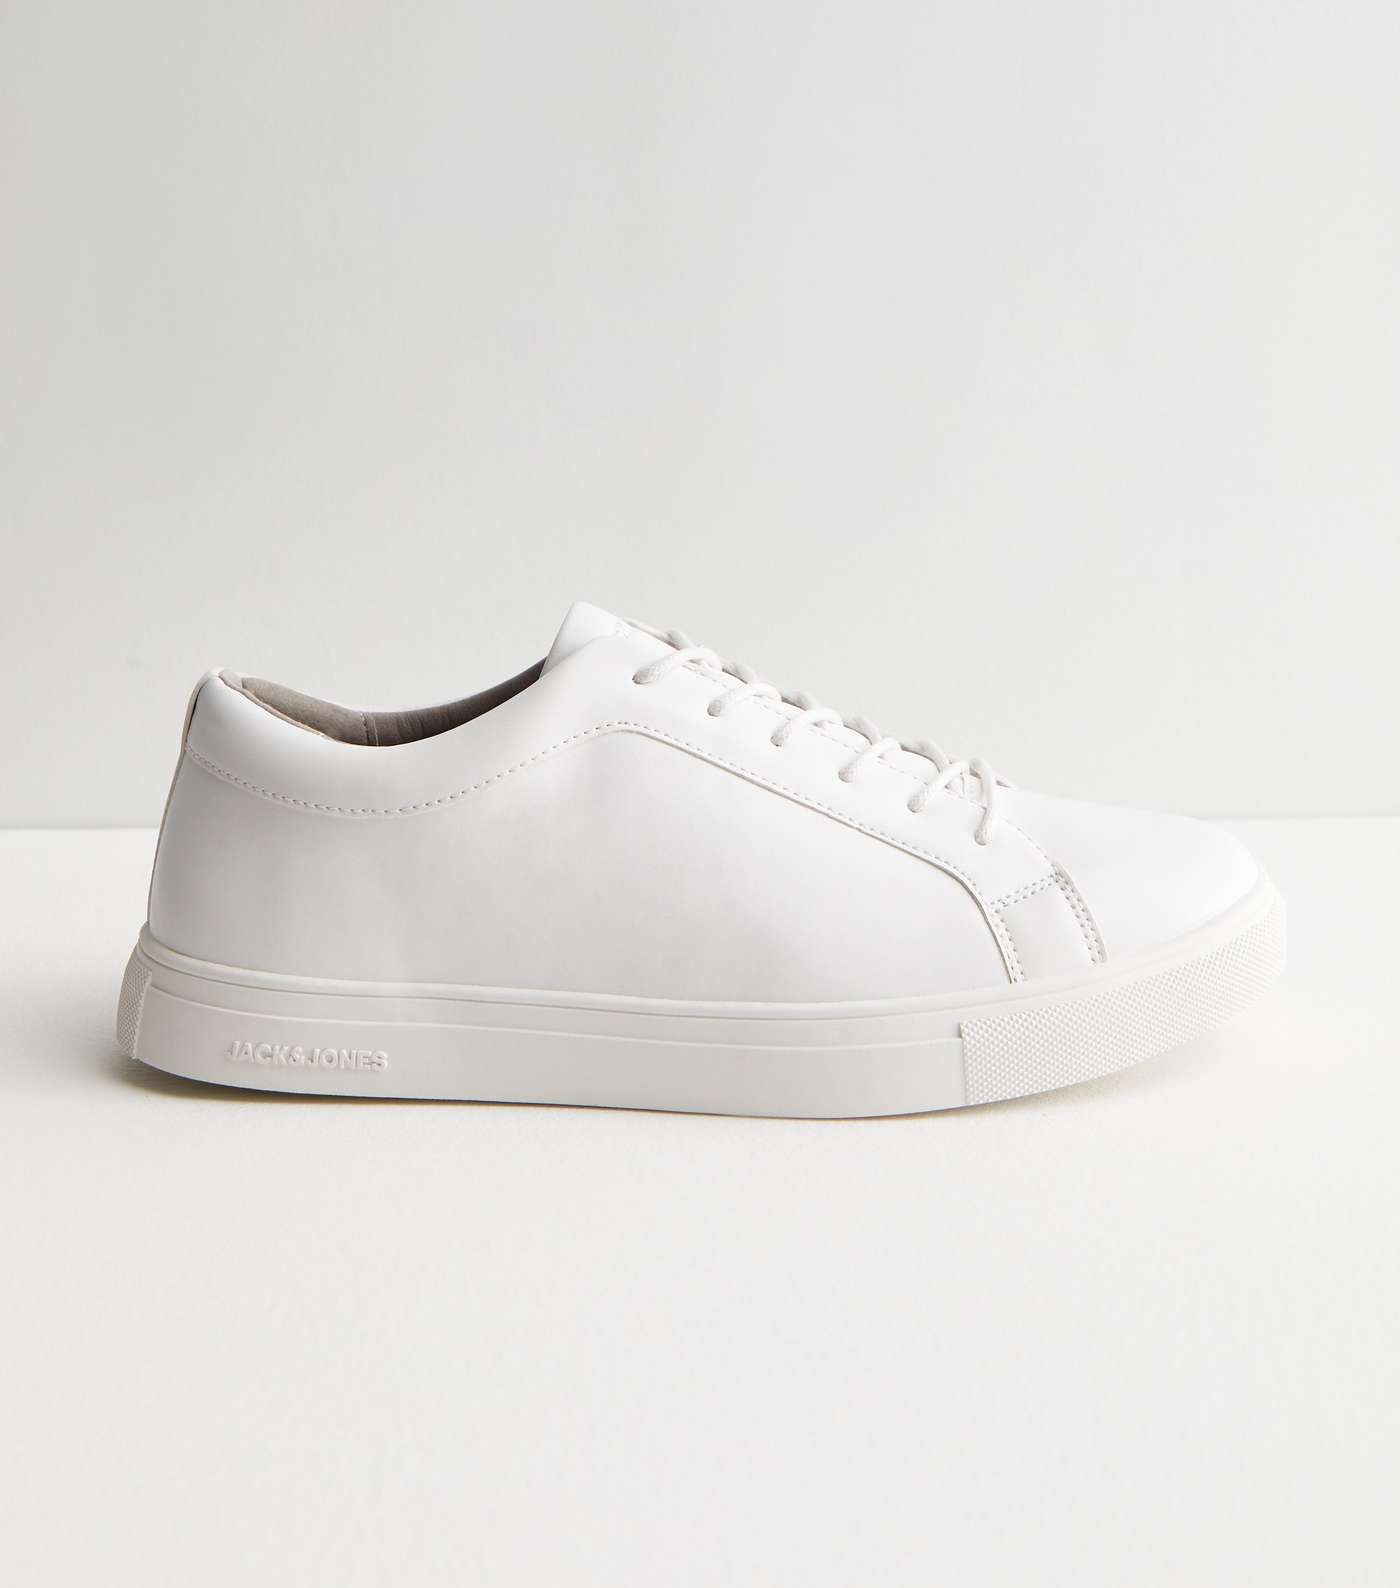 Jack & Jones White Leather-Look Lace Up Trainers Image 3